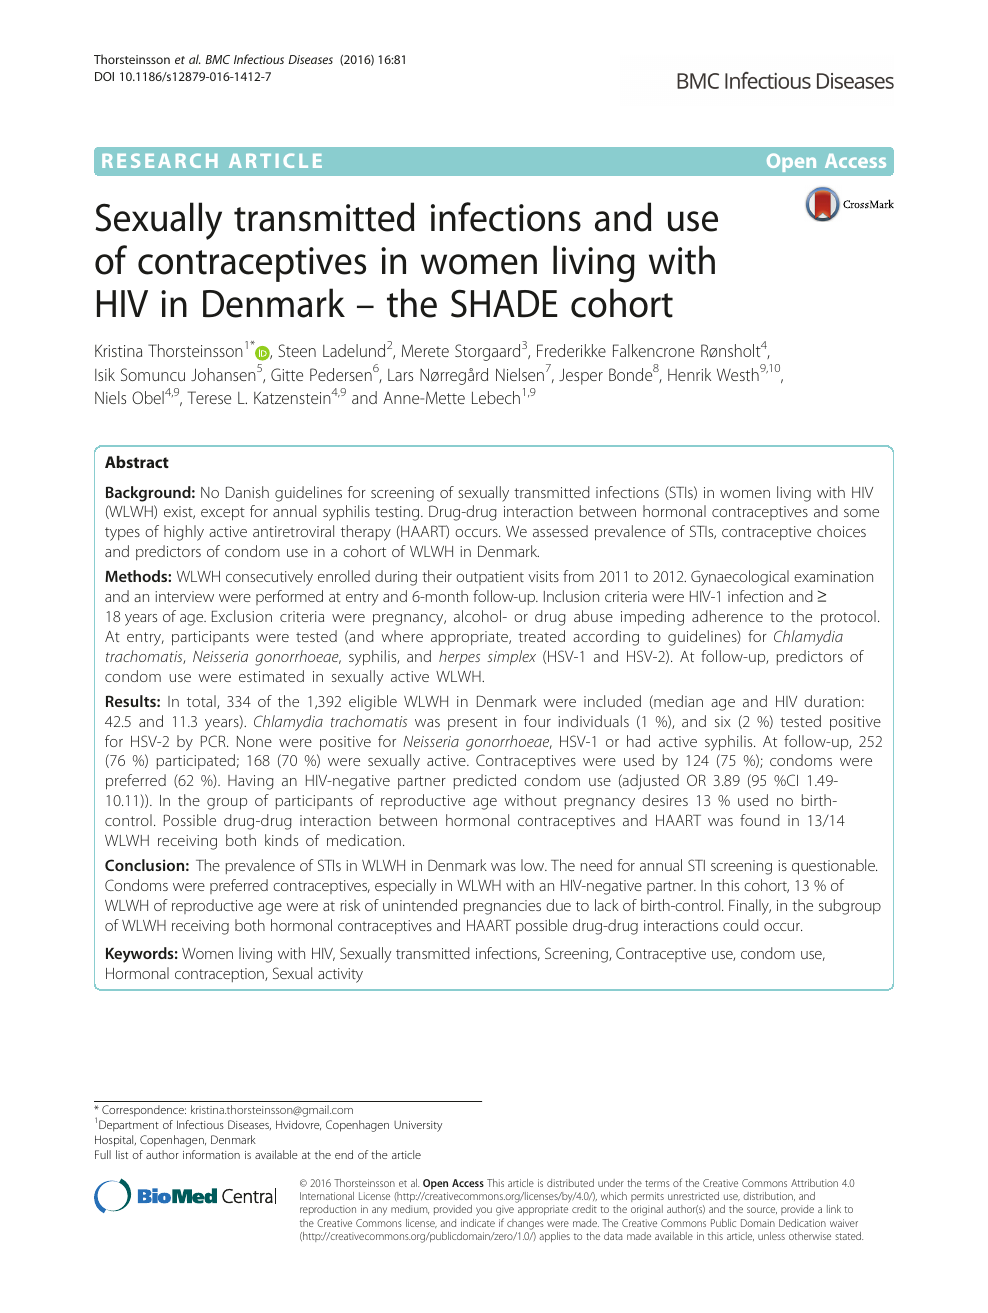 Sexually transmitted infections and use of contraceptives in women living with HIV in Denmark – the SHADE cohort